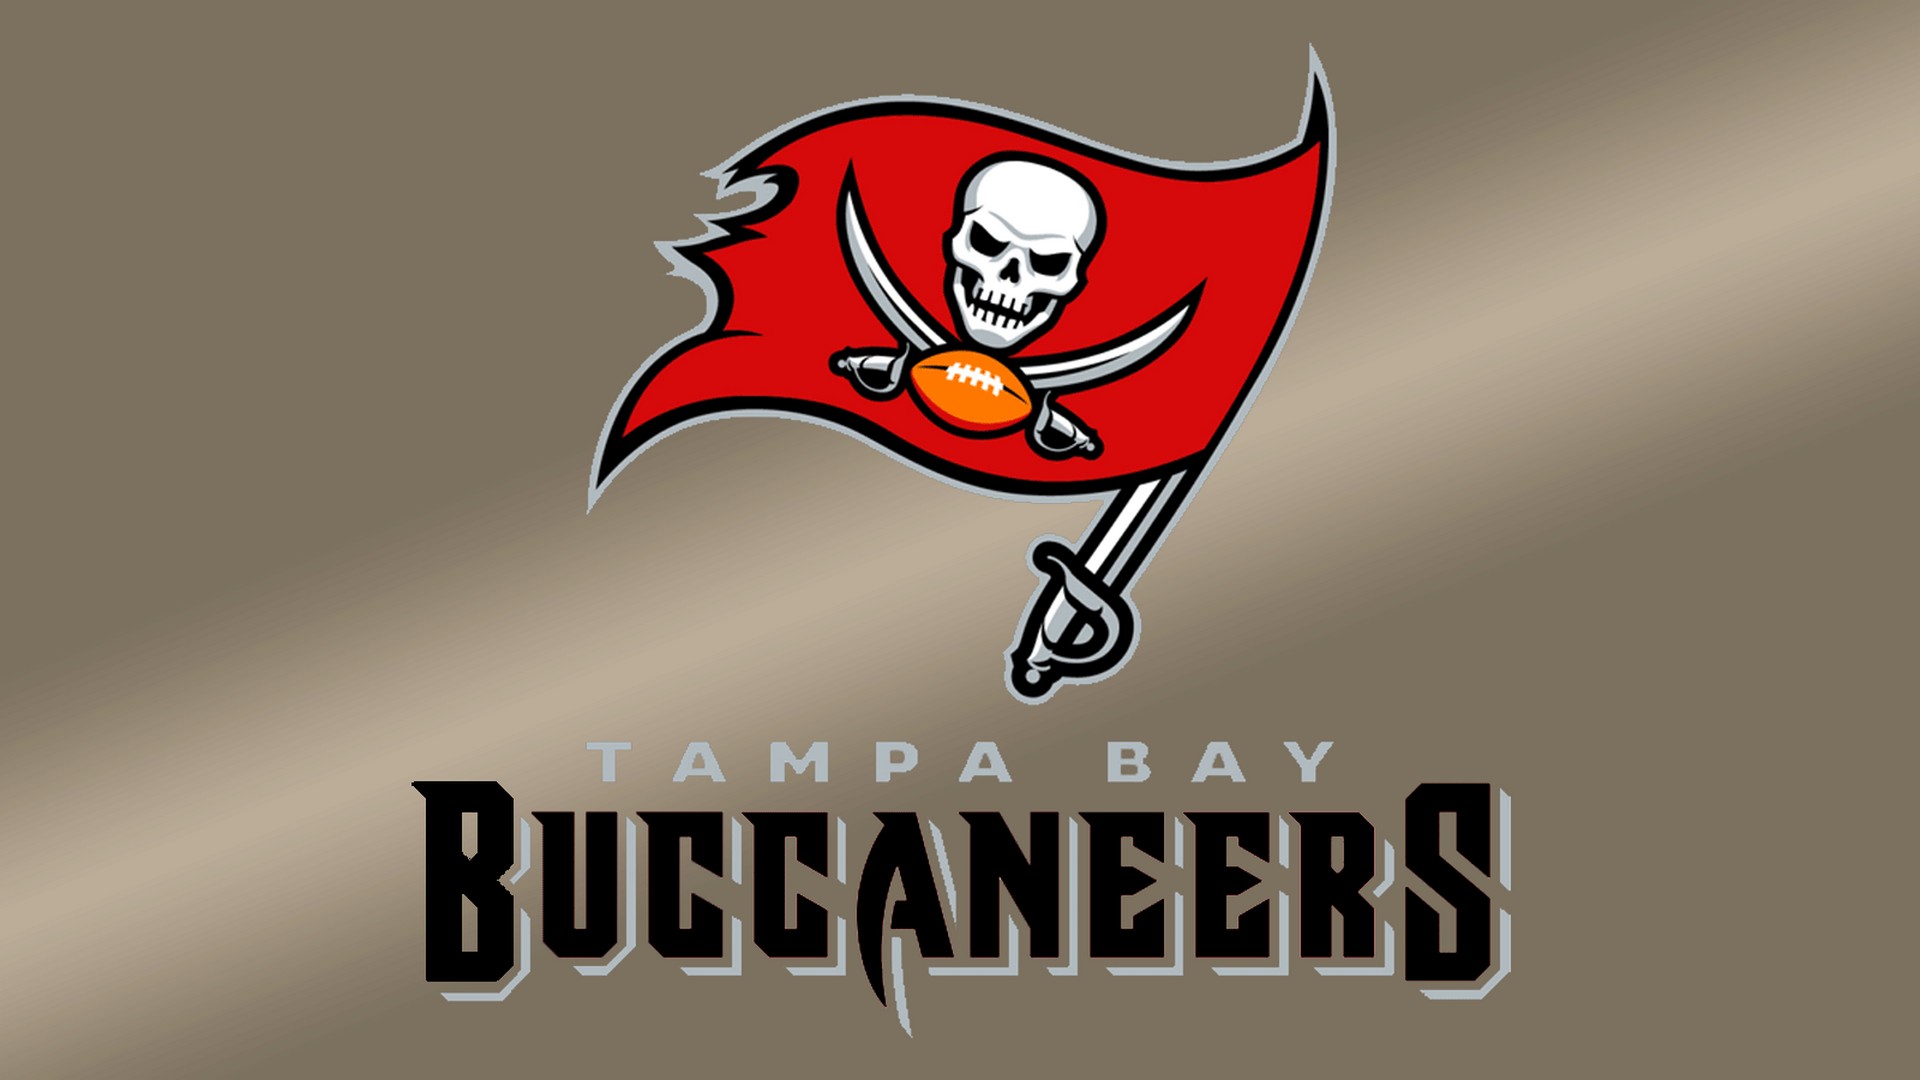 Tampa Bay Buccaneers Logo Wallpaper HD With high-resolution 1920X1080 pixel. You can use this wallpaper for your Mac or Windows Desktop Background, iPhone, Android or Tablet and another Smartphone device